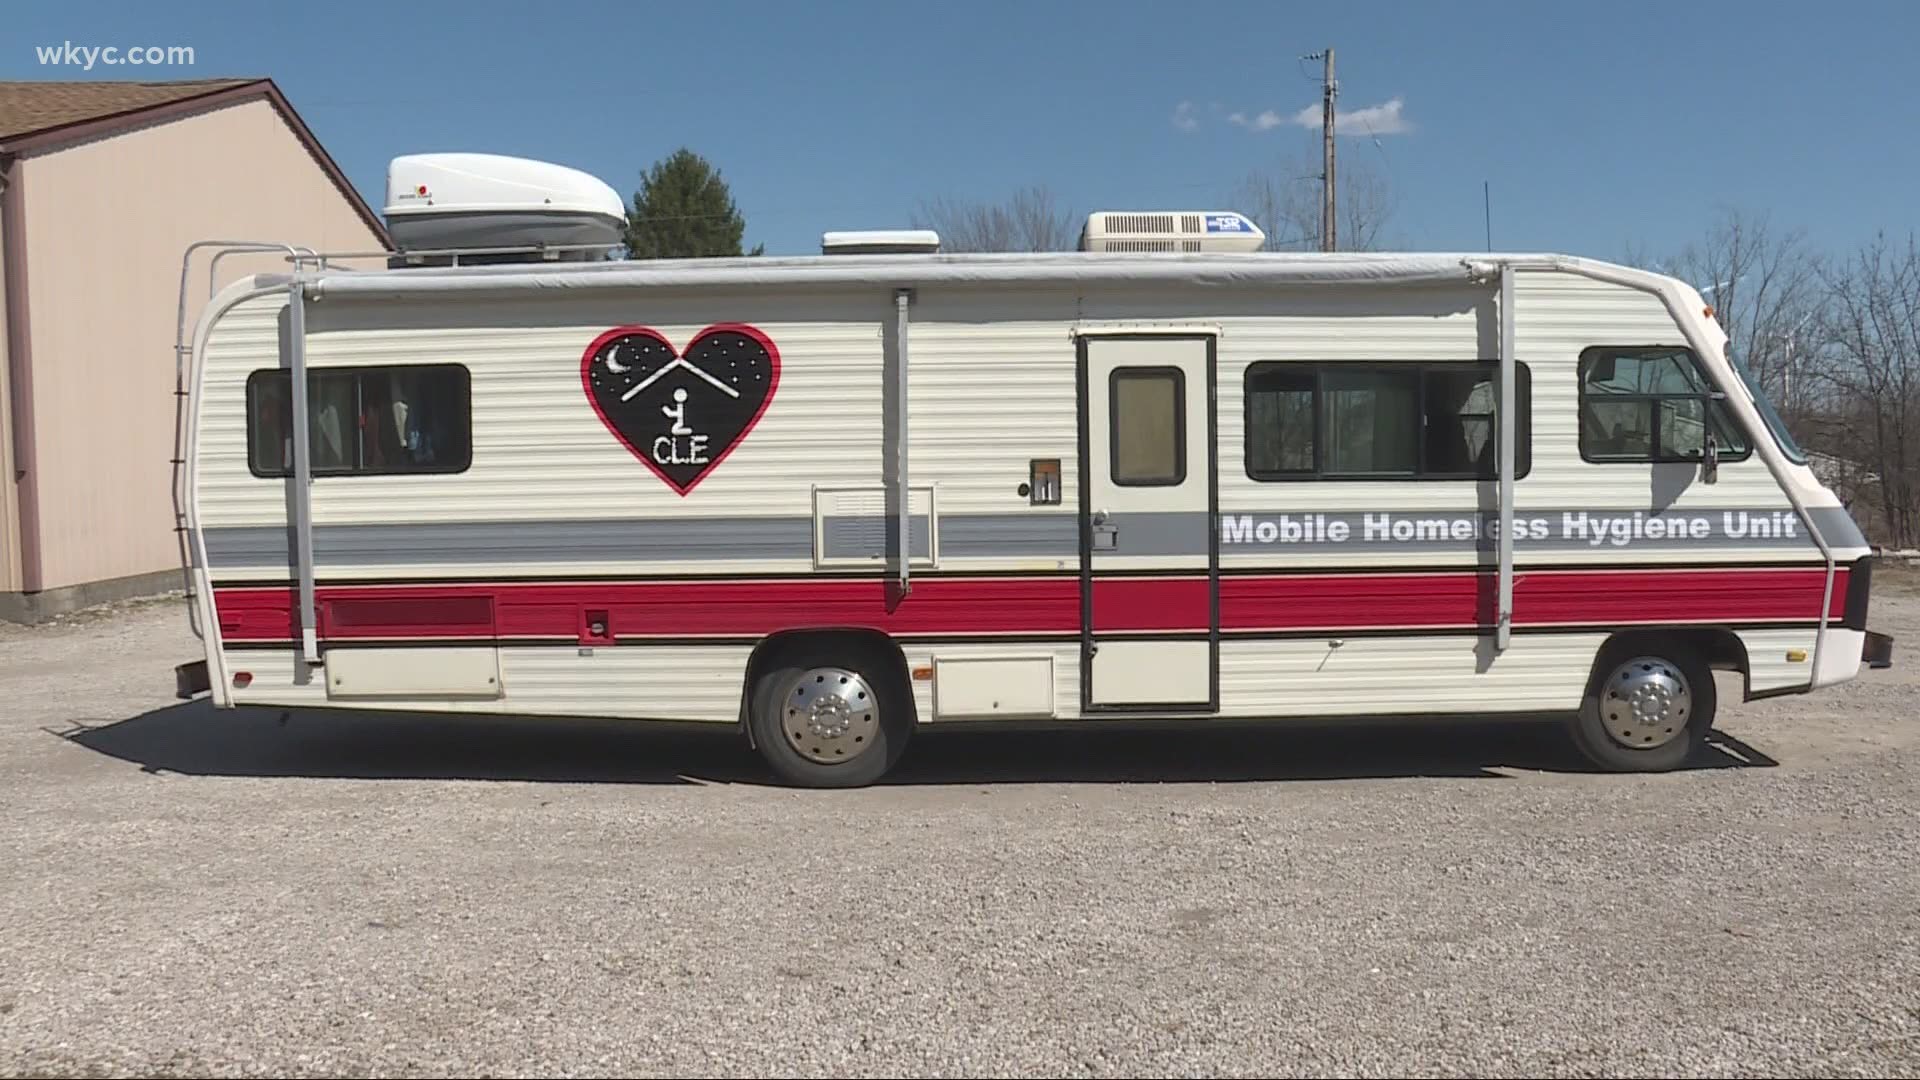 A new RV for Homeless Hook up CLE is going to make a difference starting next month. January Keaton has the details.